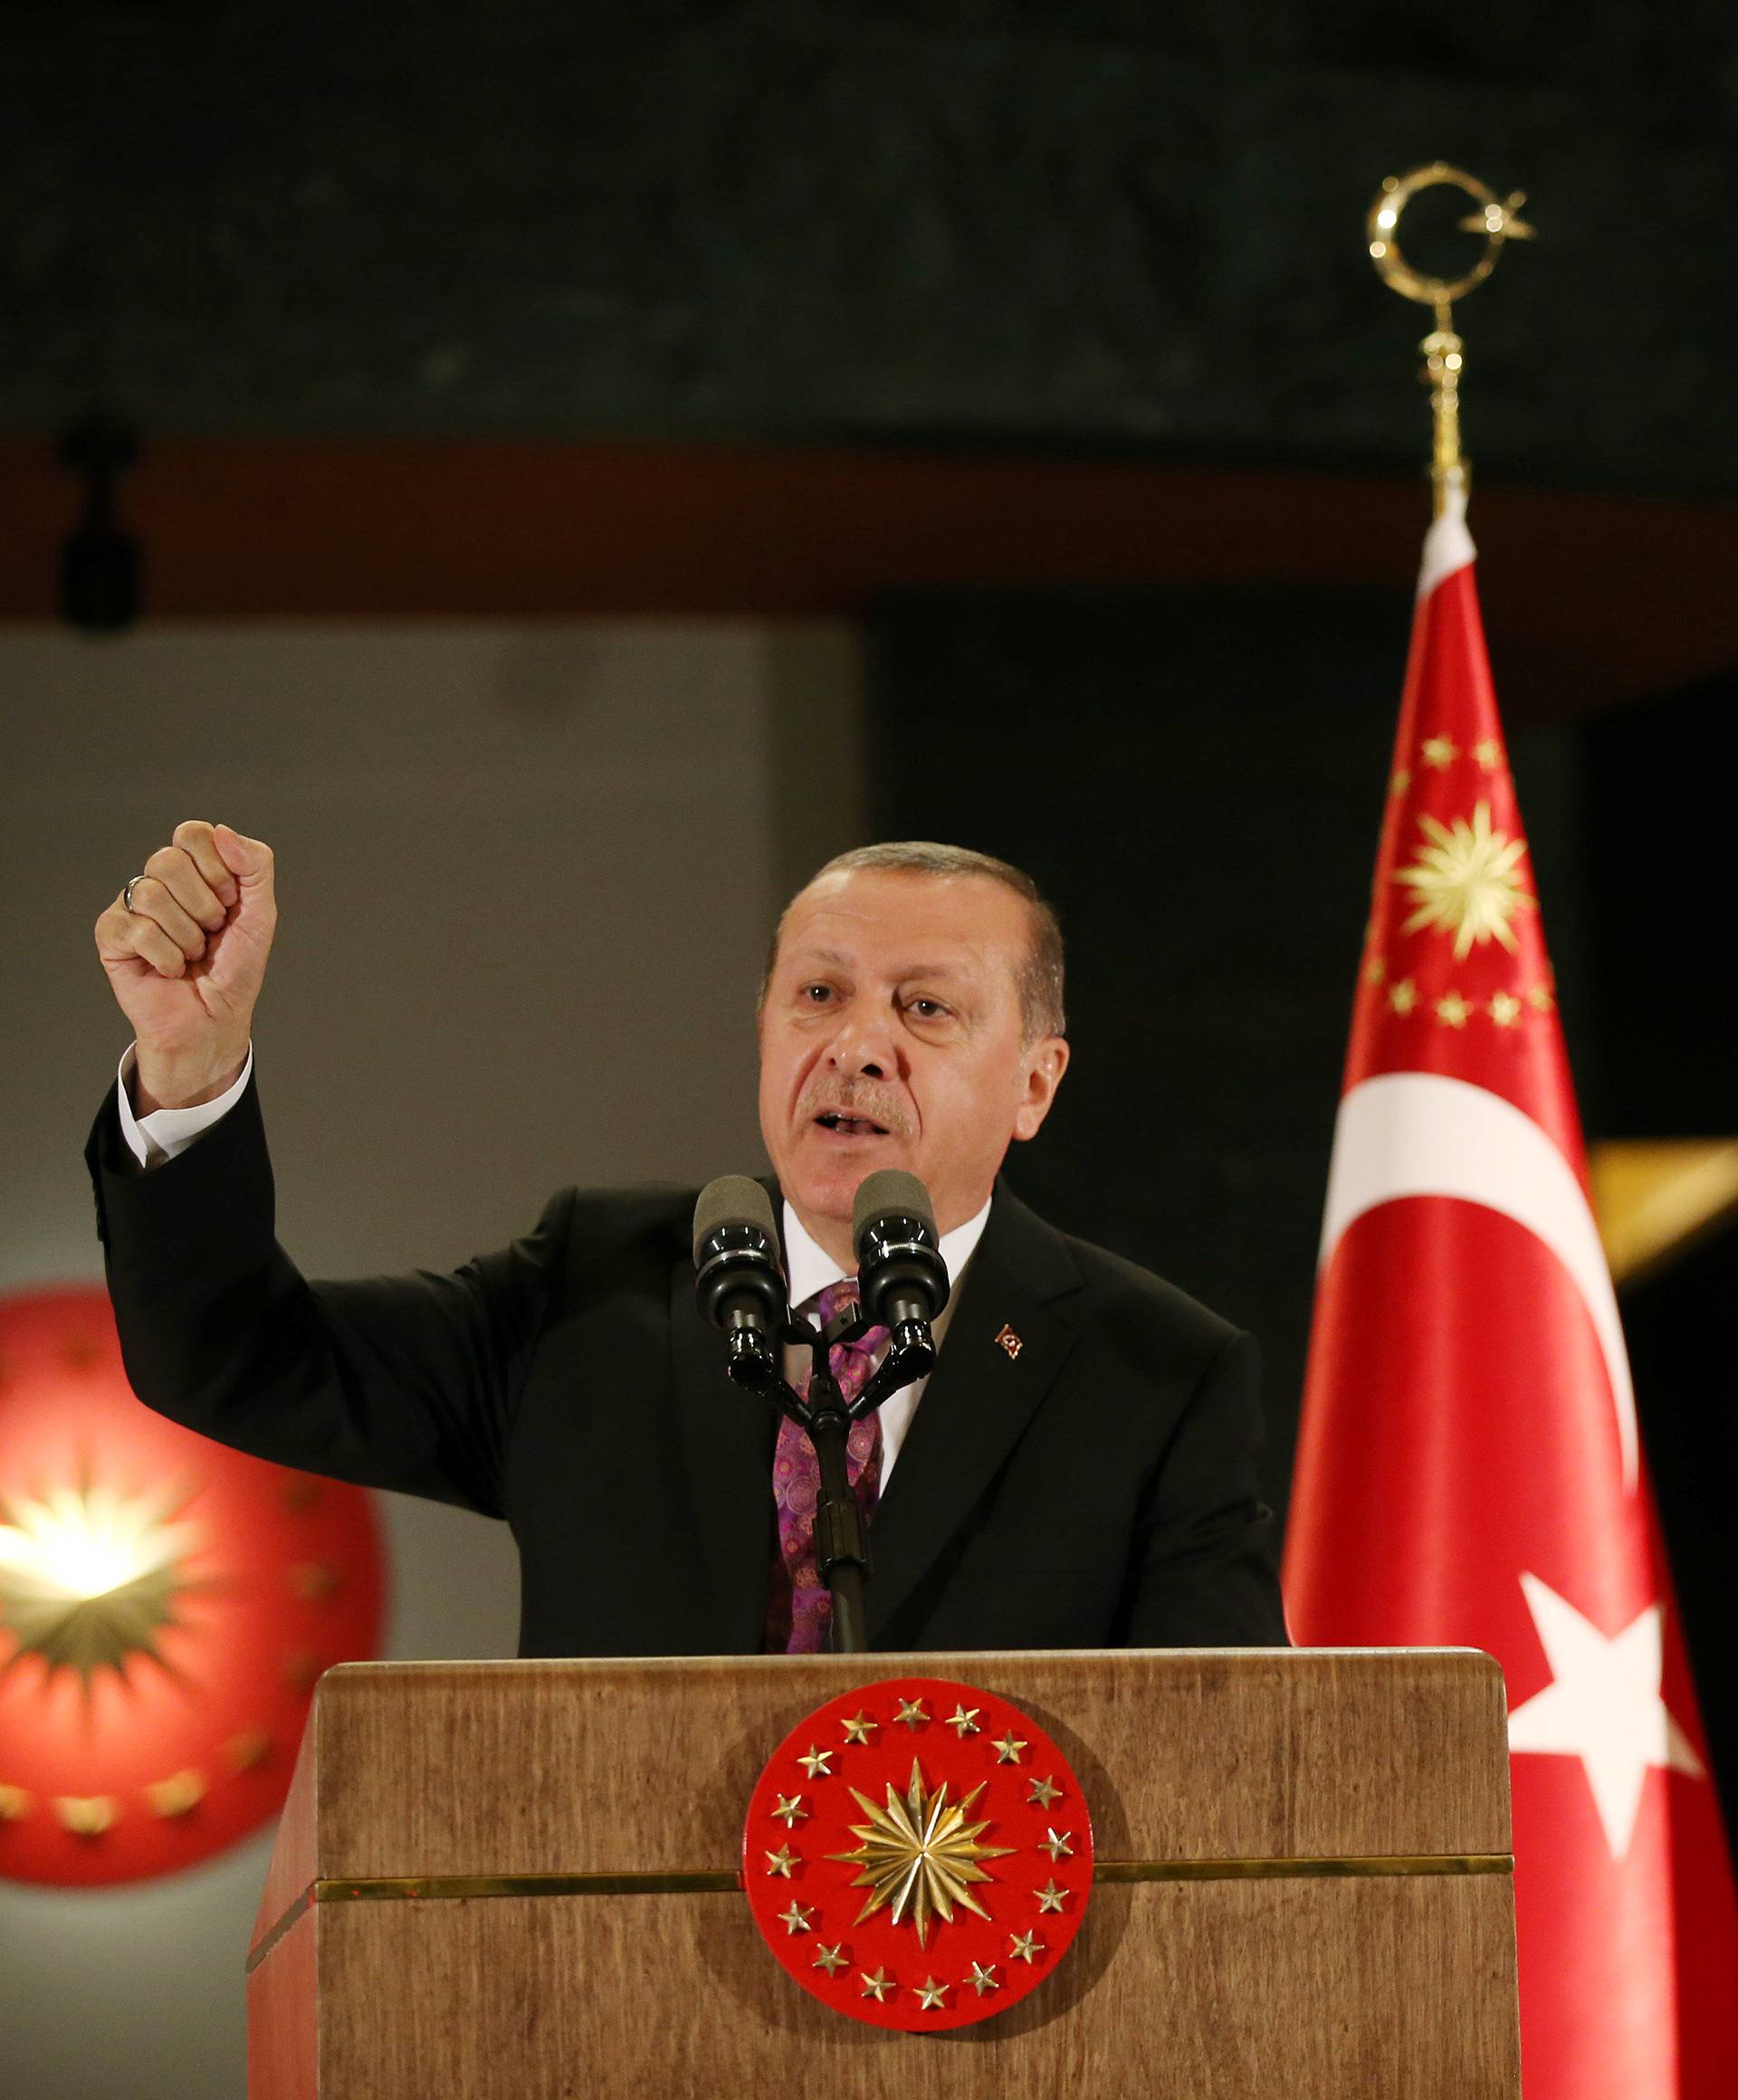 Turkish President Erdogan makes a speech during a fast-breaking iftar dinner at the Presidential Palace in Ankara